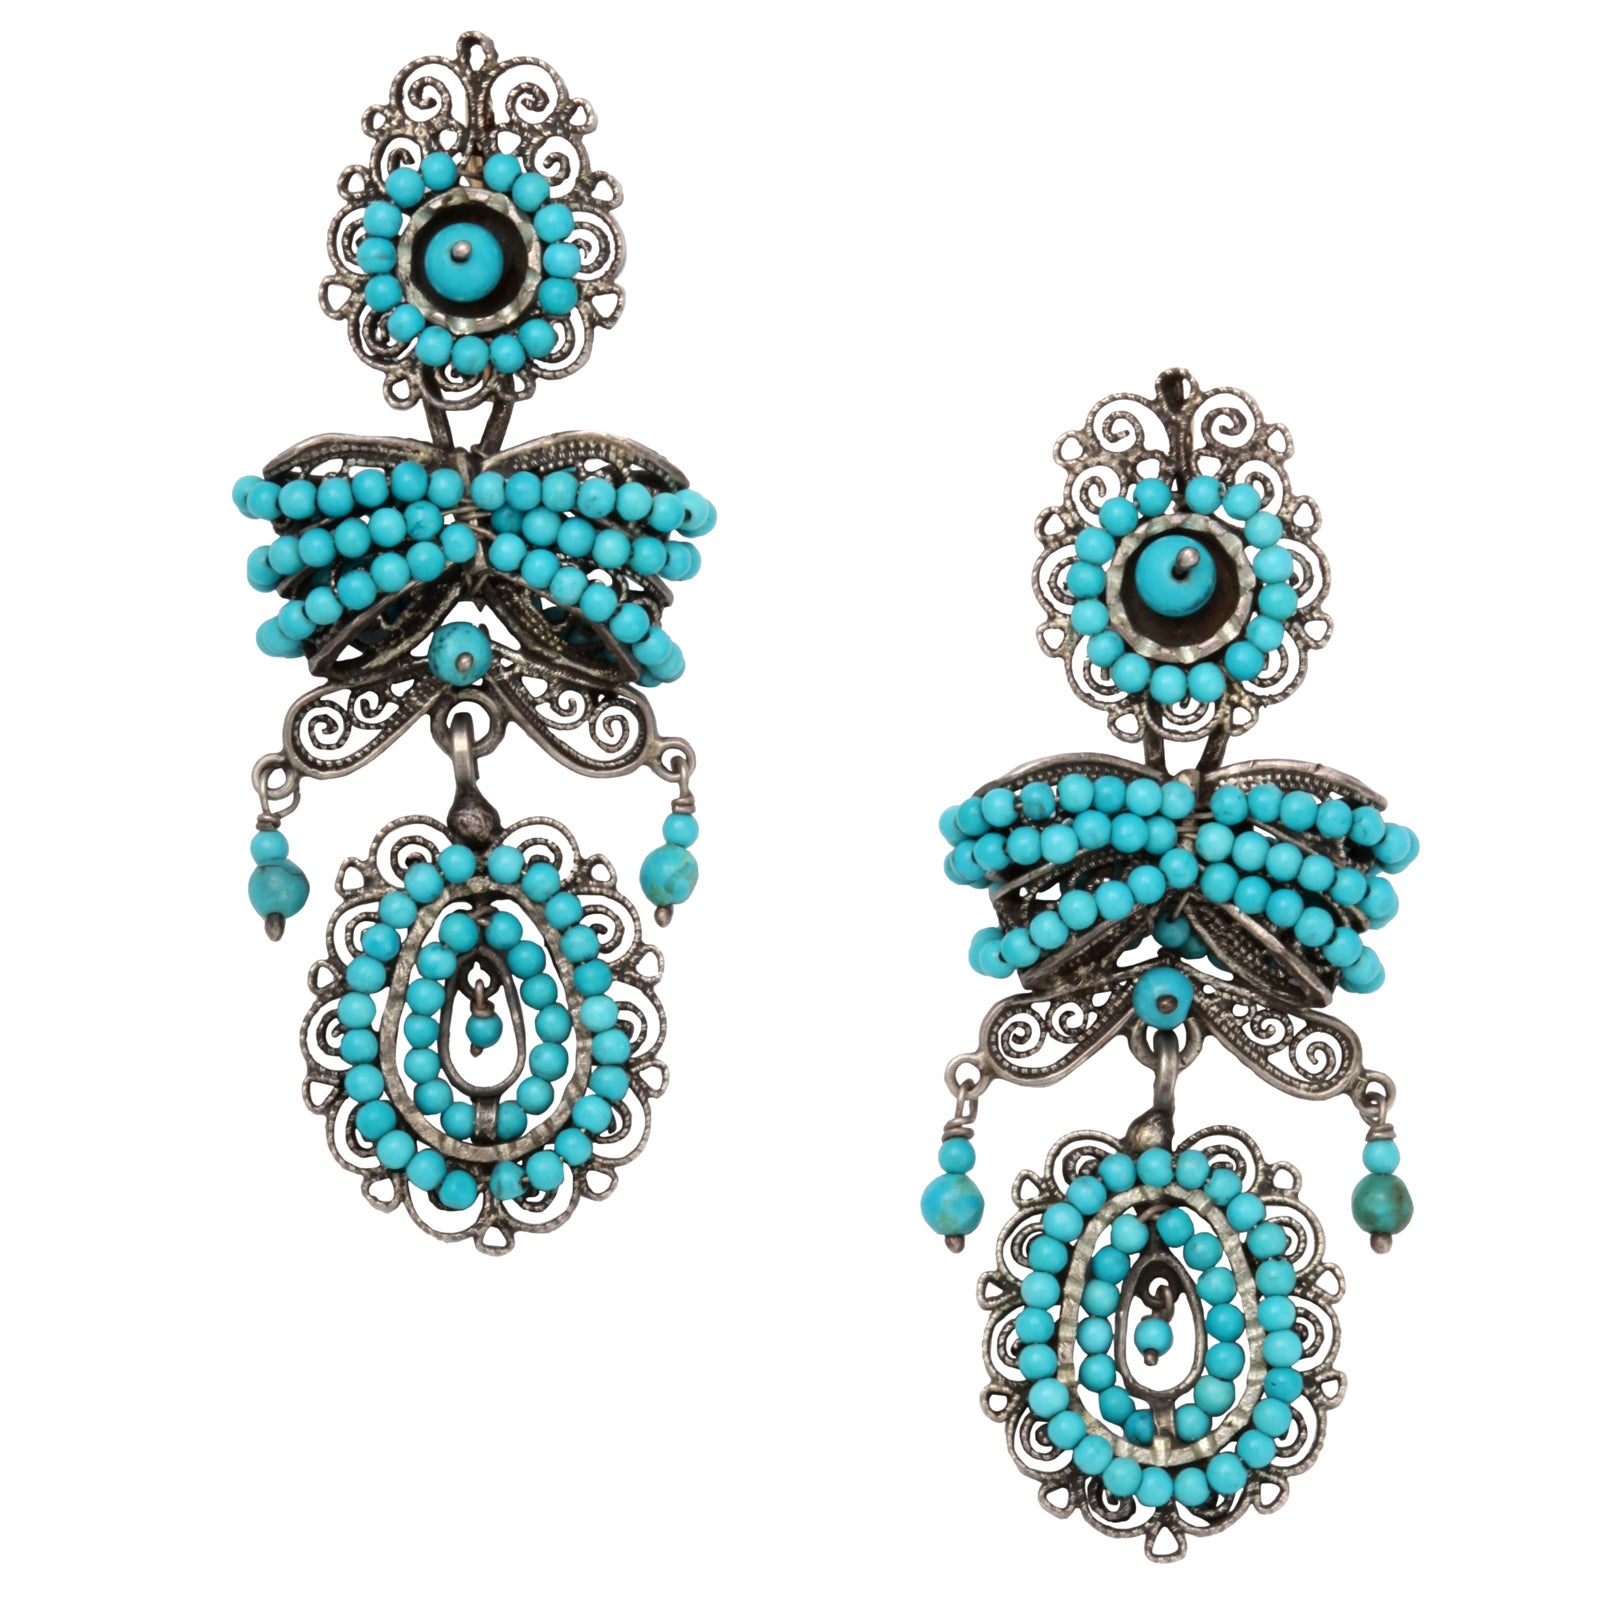 Romantic Turquoise and Silver Chandelier Earrings at 1stdibs